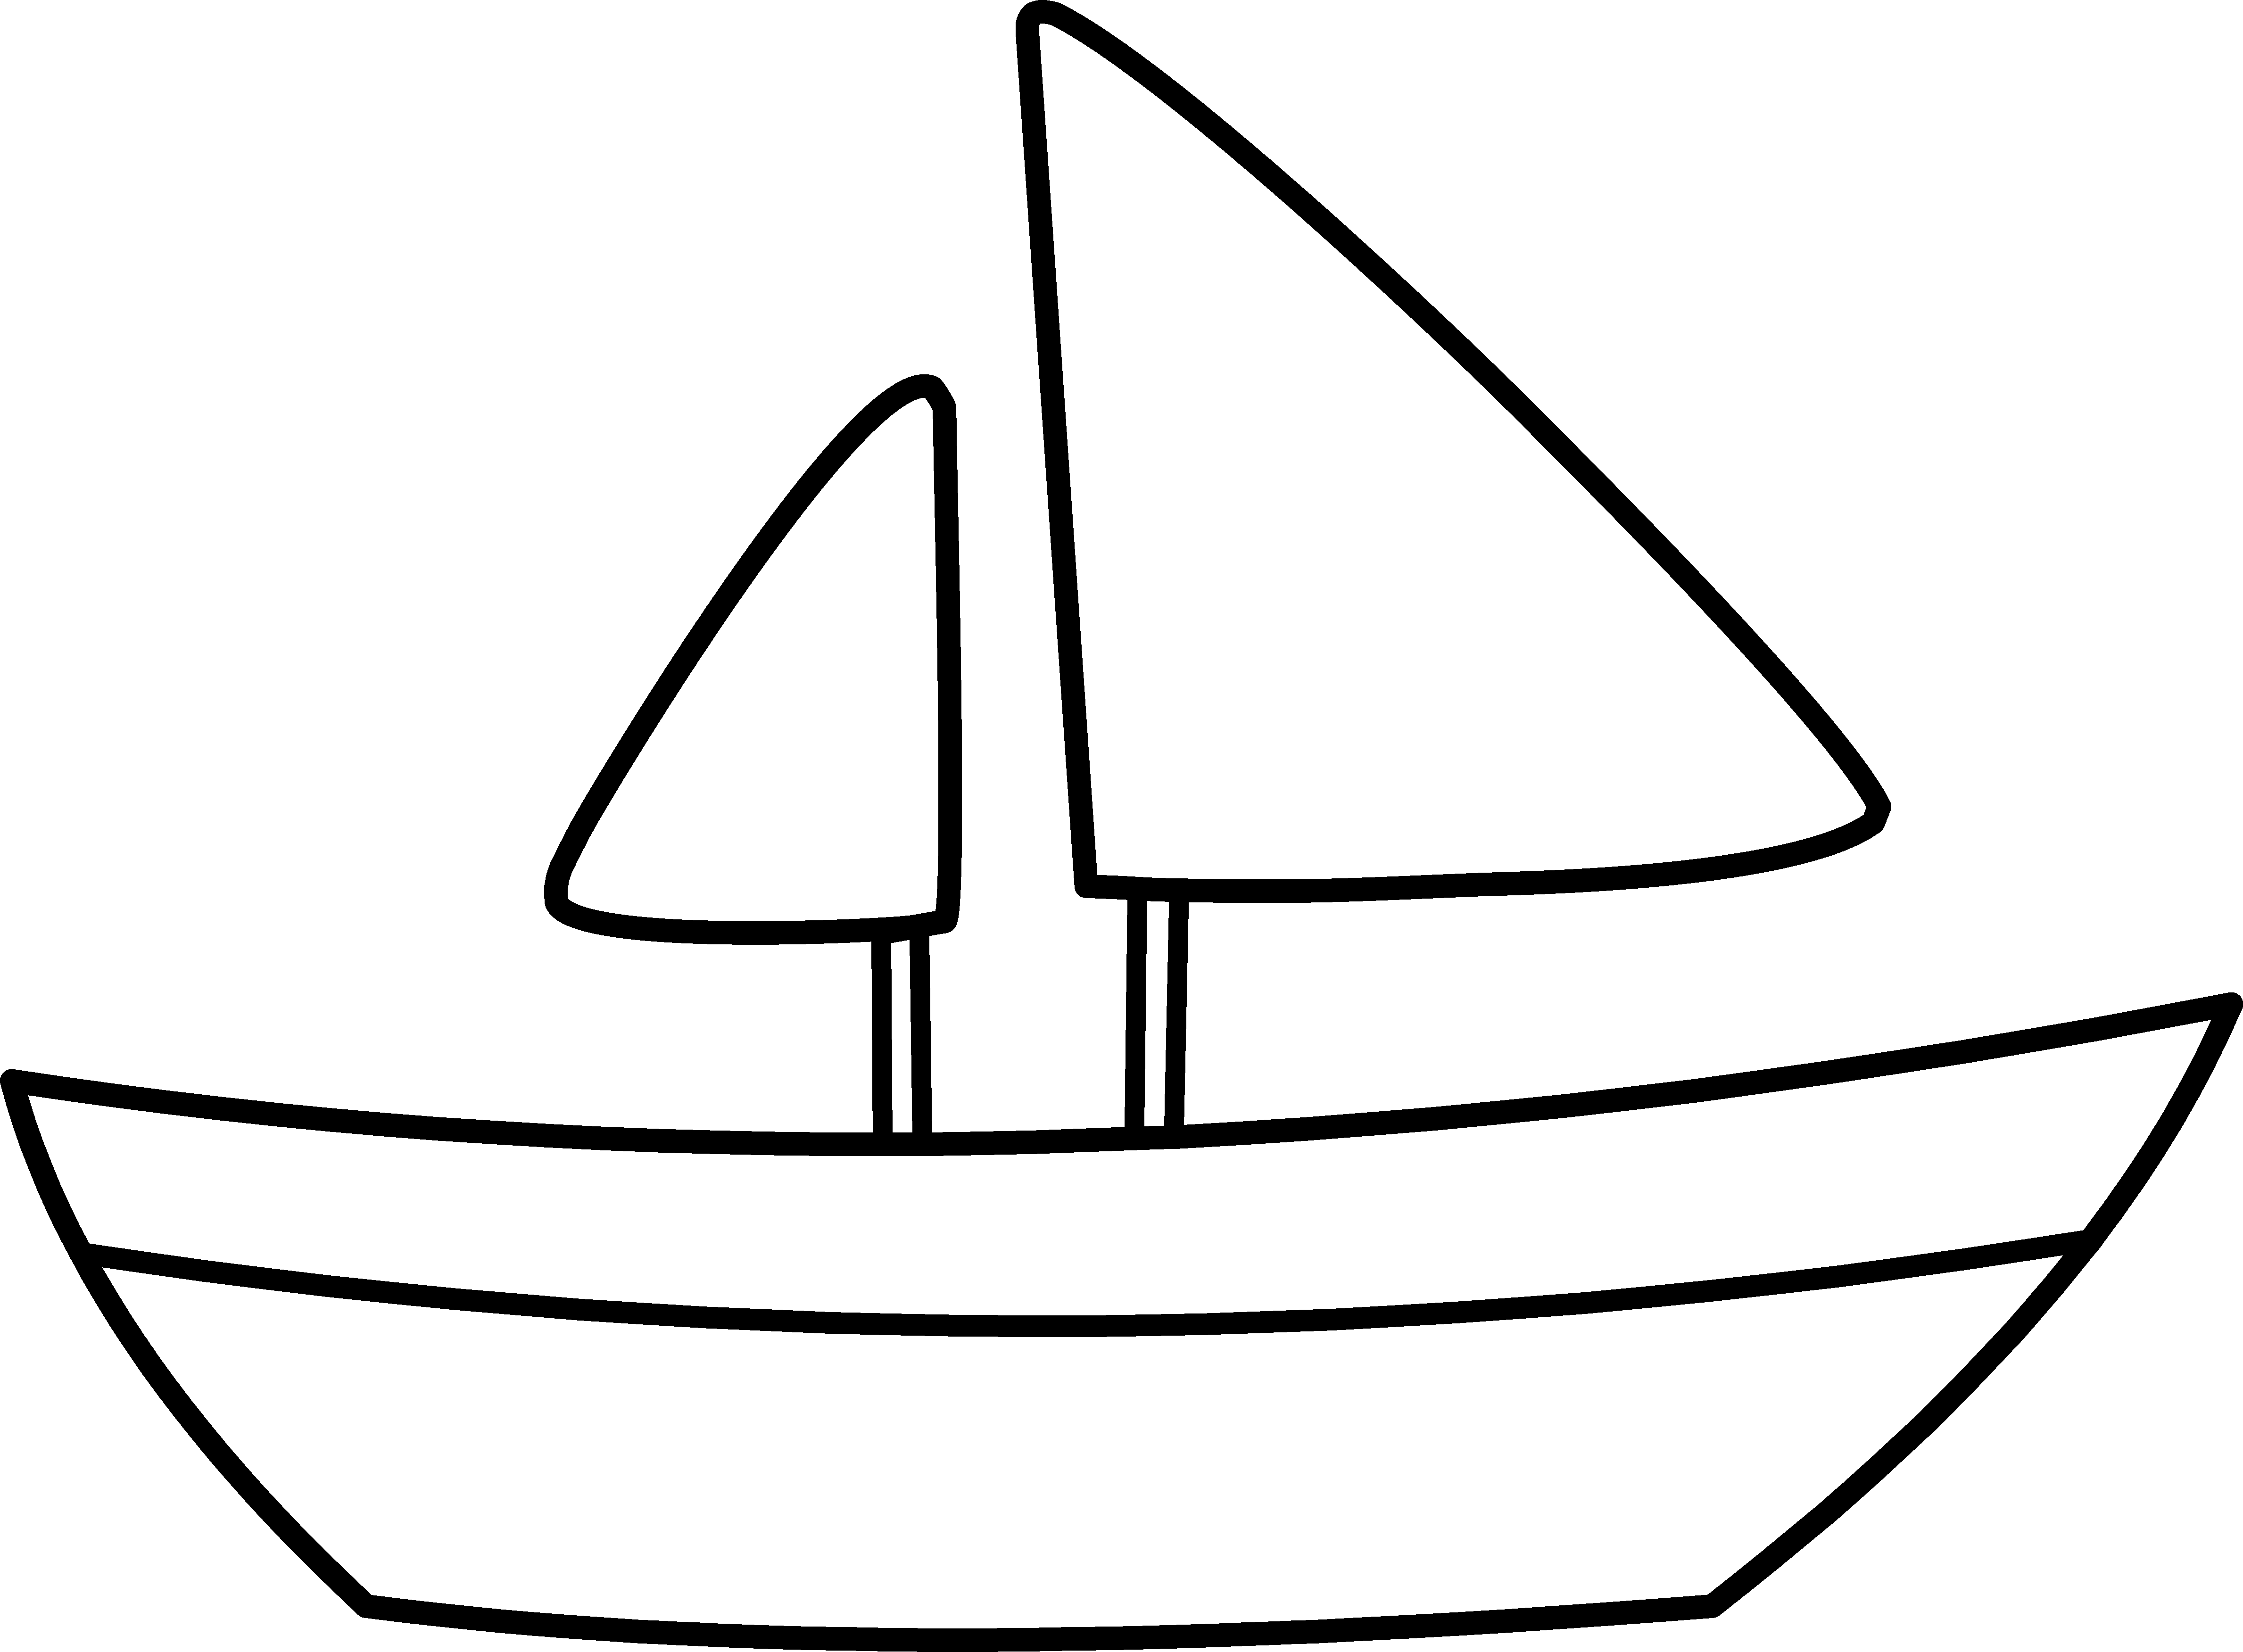 Simple Sailboat Coloring Page - Free Clip Art